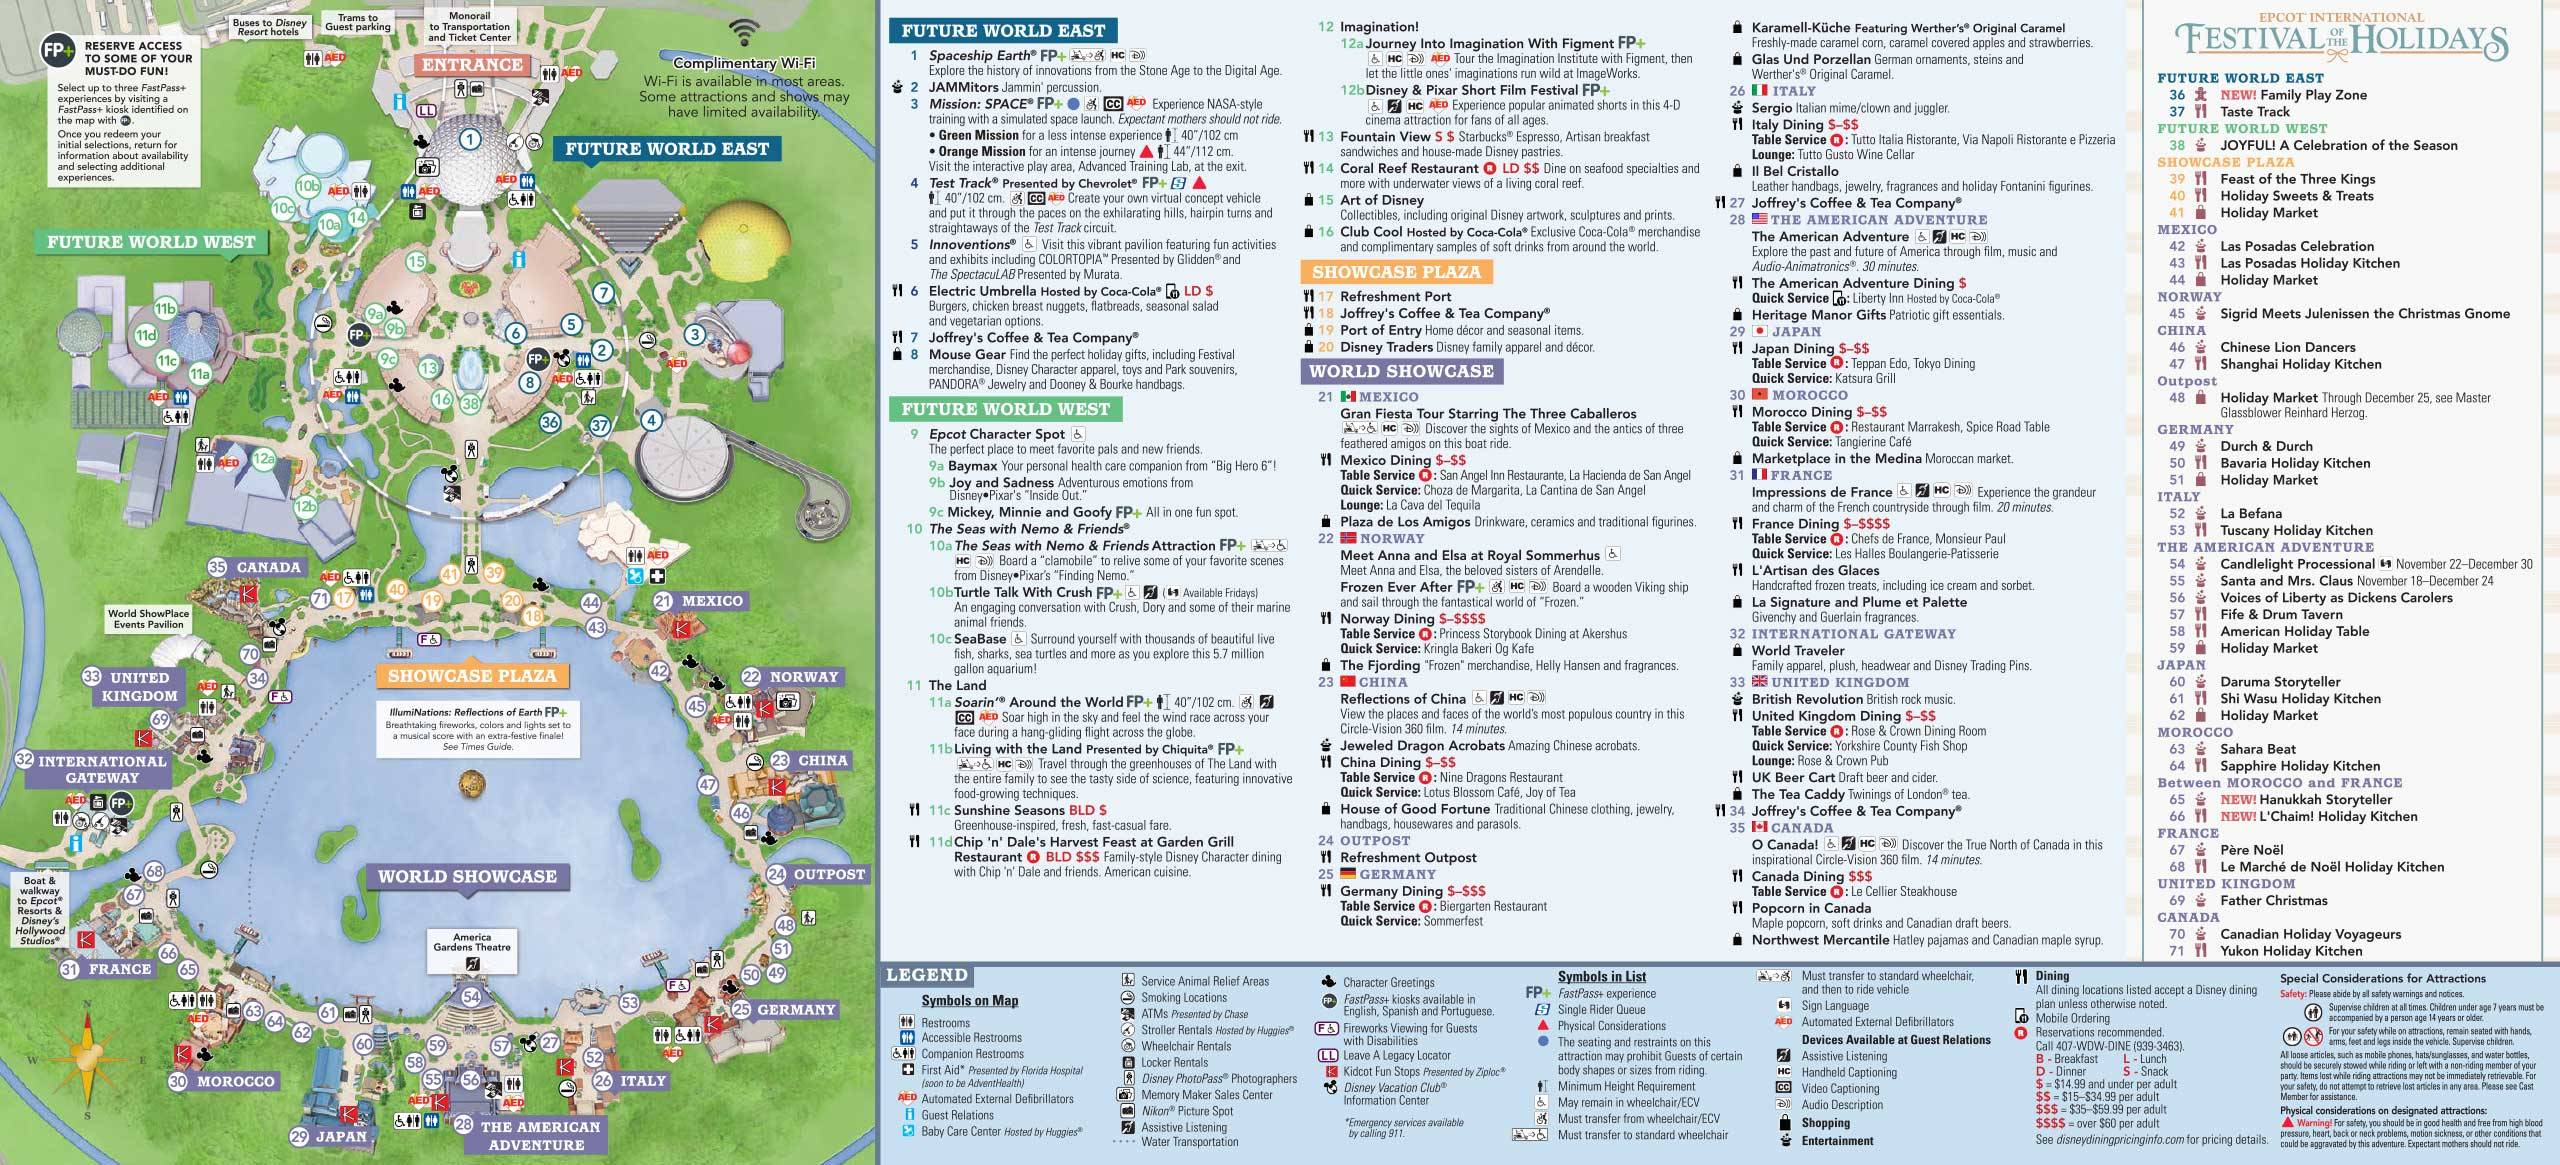 2018 Epcot Festival of the Holidays guide map and times guide